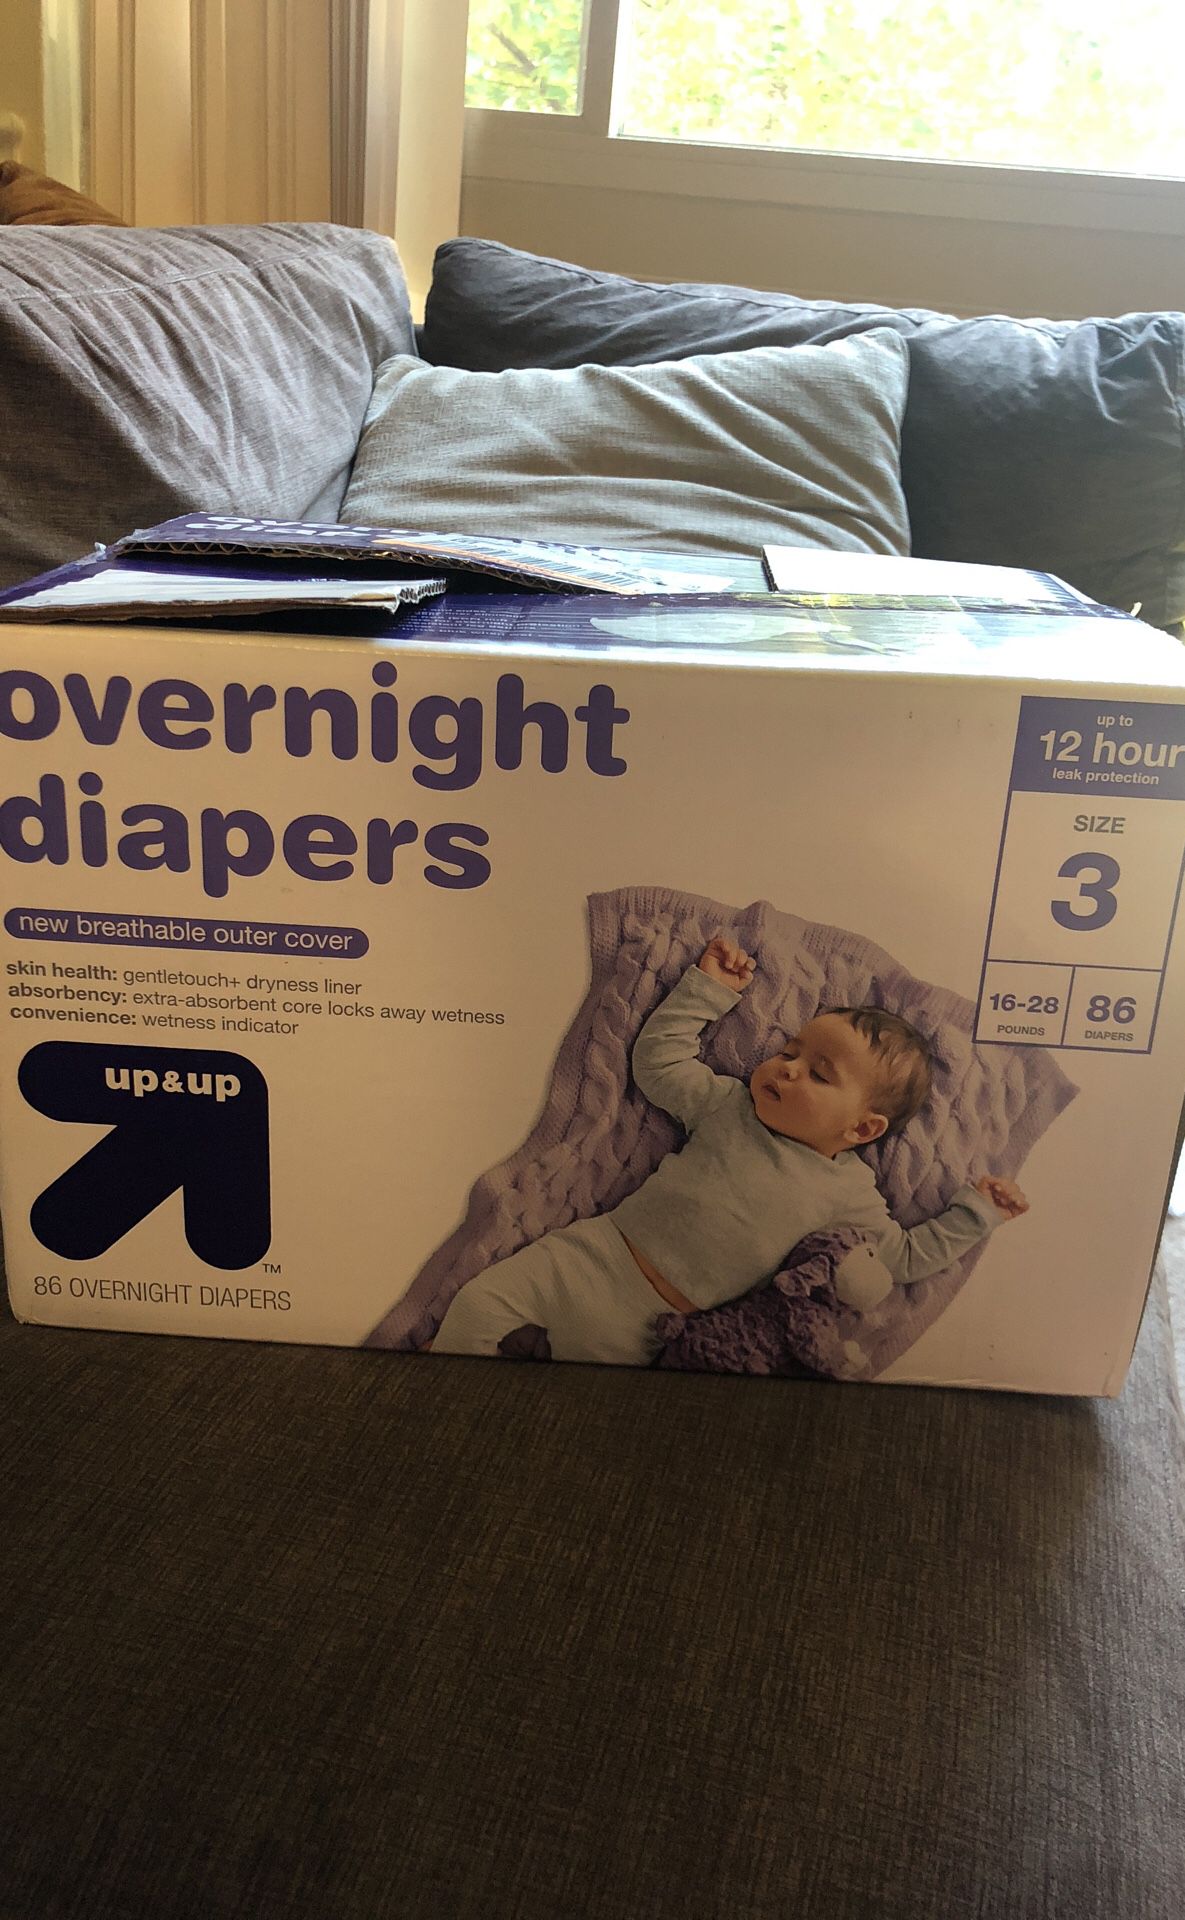 Over night diaper size 3